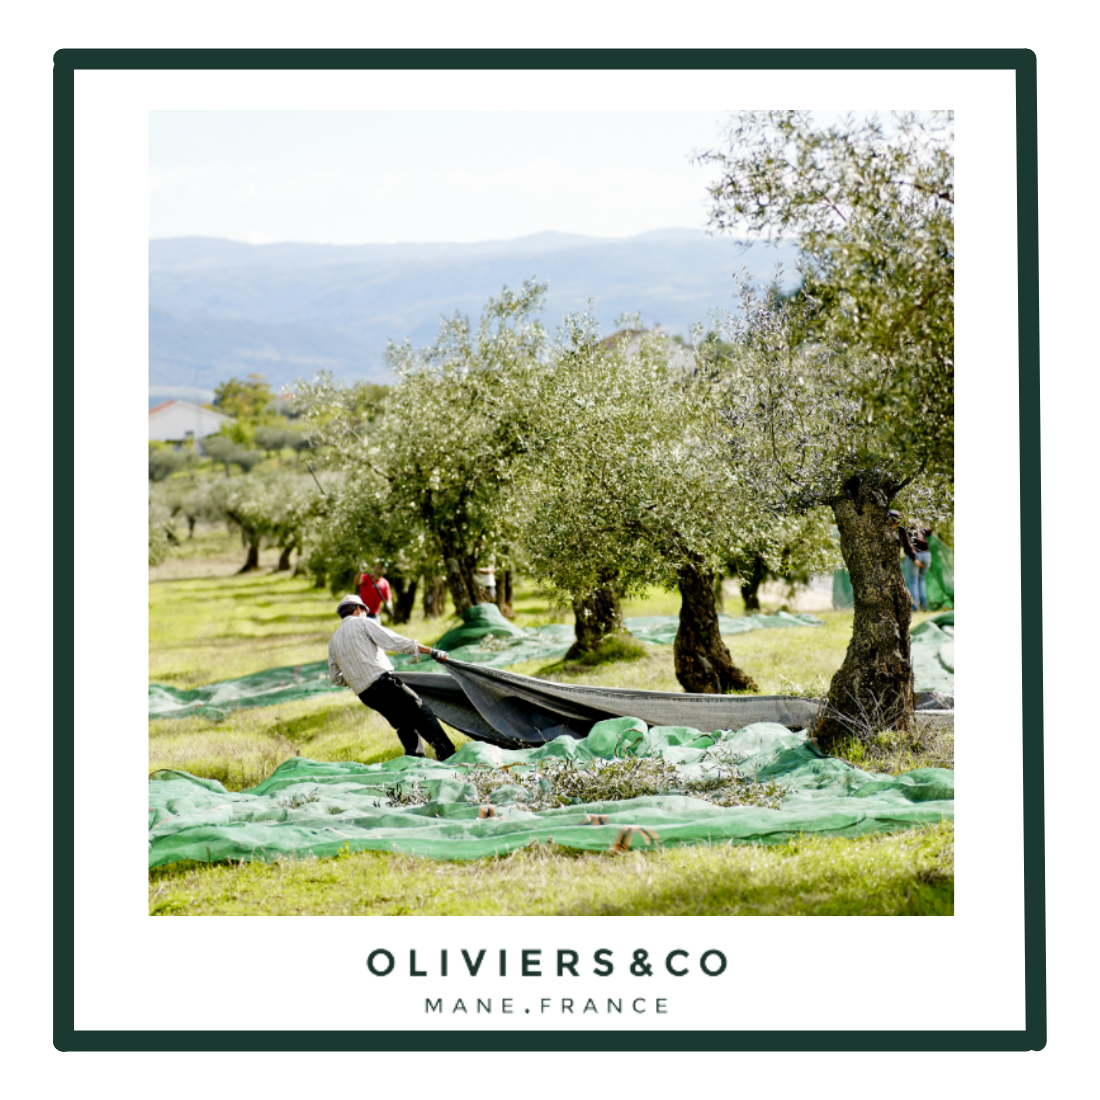 The best extra virgin olive oil : how we proceed? 